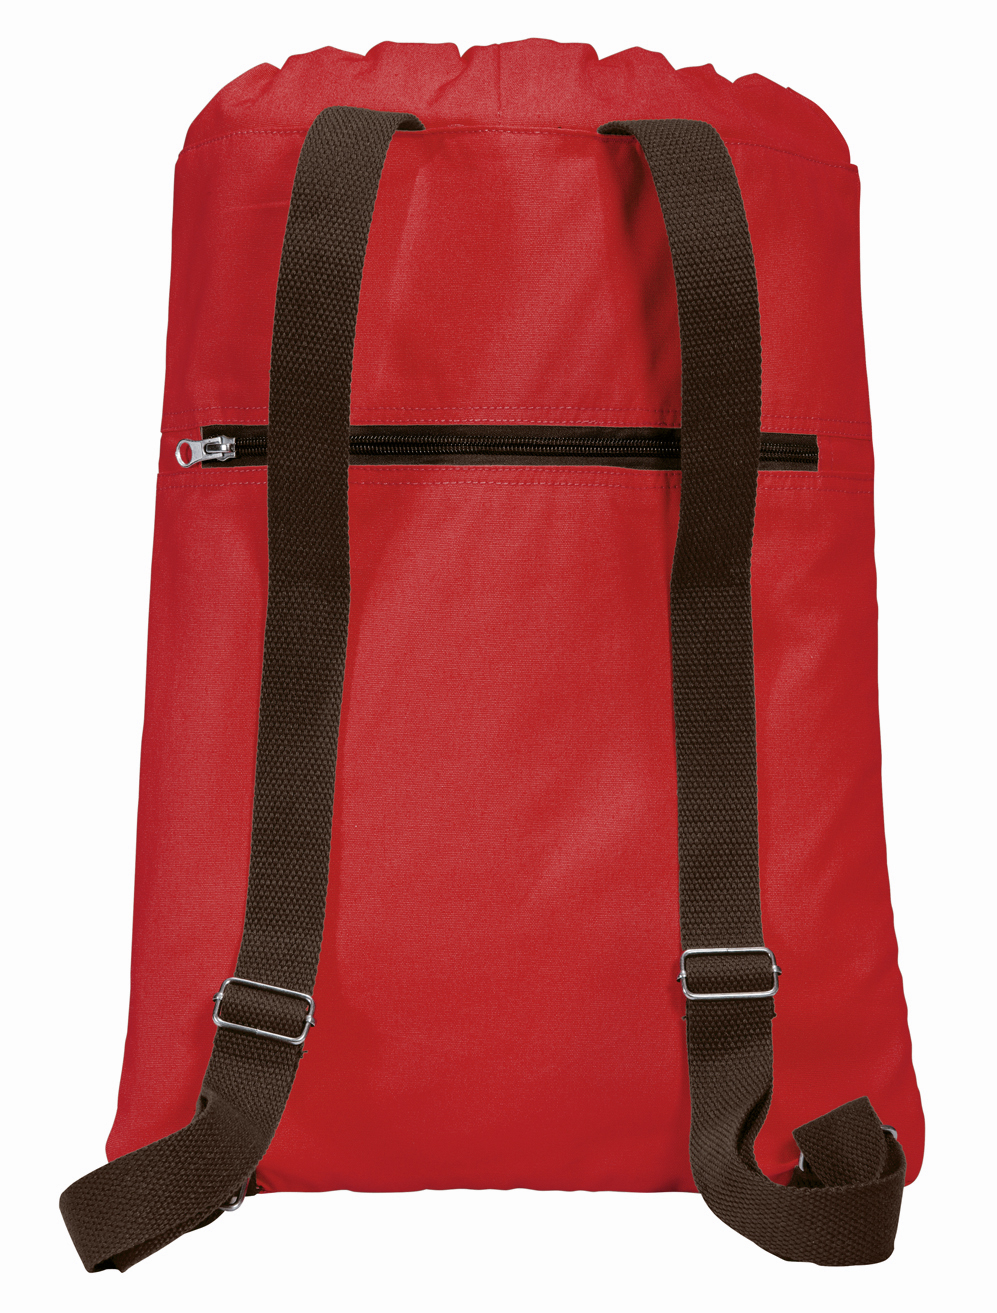 Canvas Rutgers University Drawstring Bag DELUXE RU Backpack Cinch Pack for Him or Her - Boys or Girls - image 2 of 2